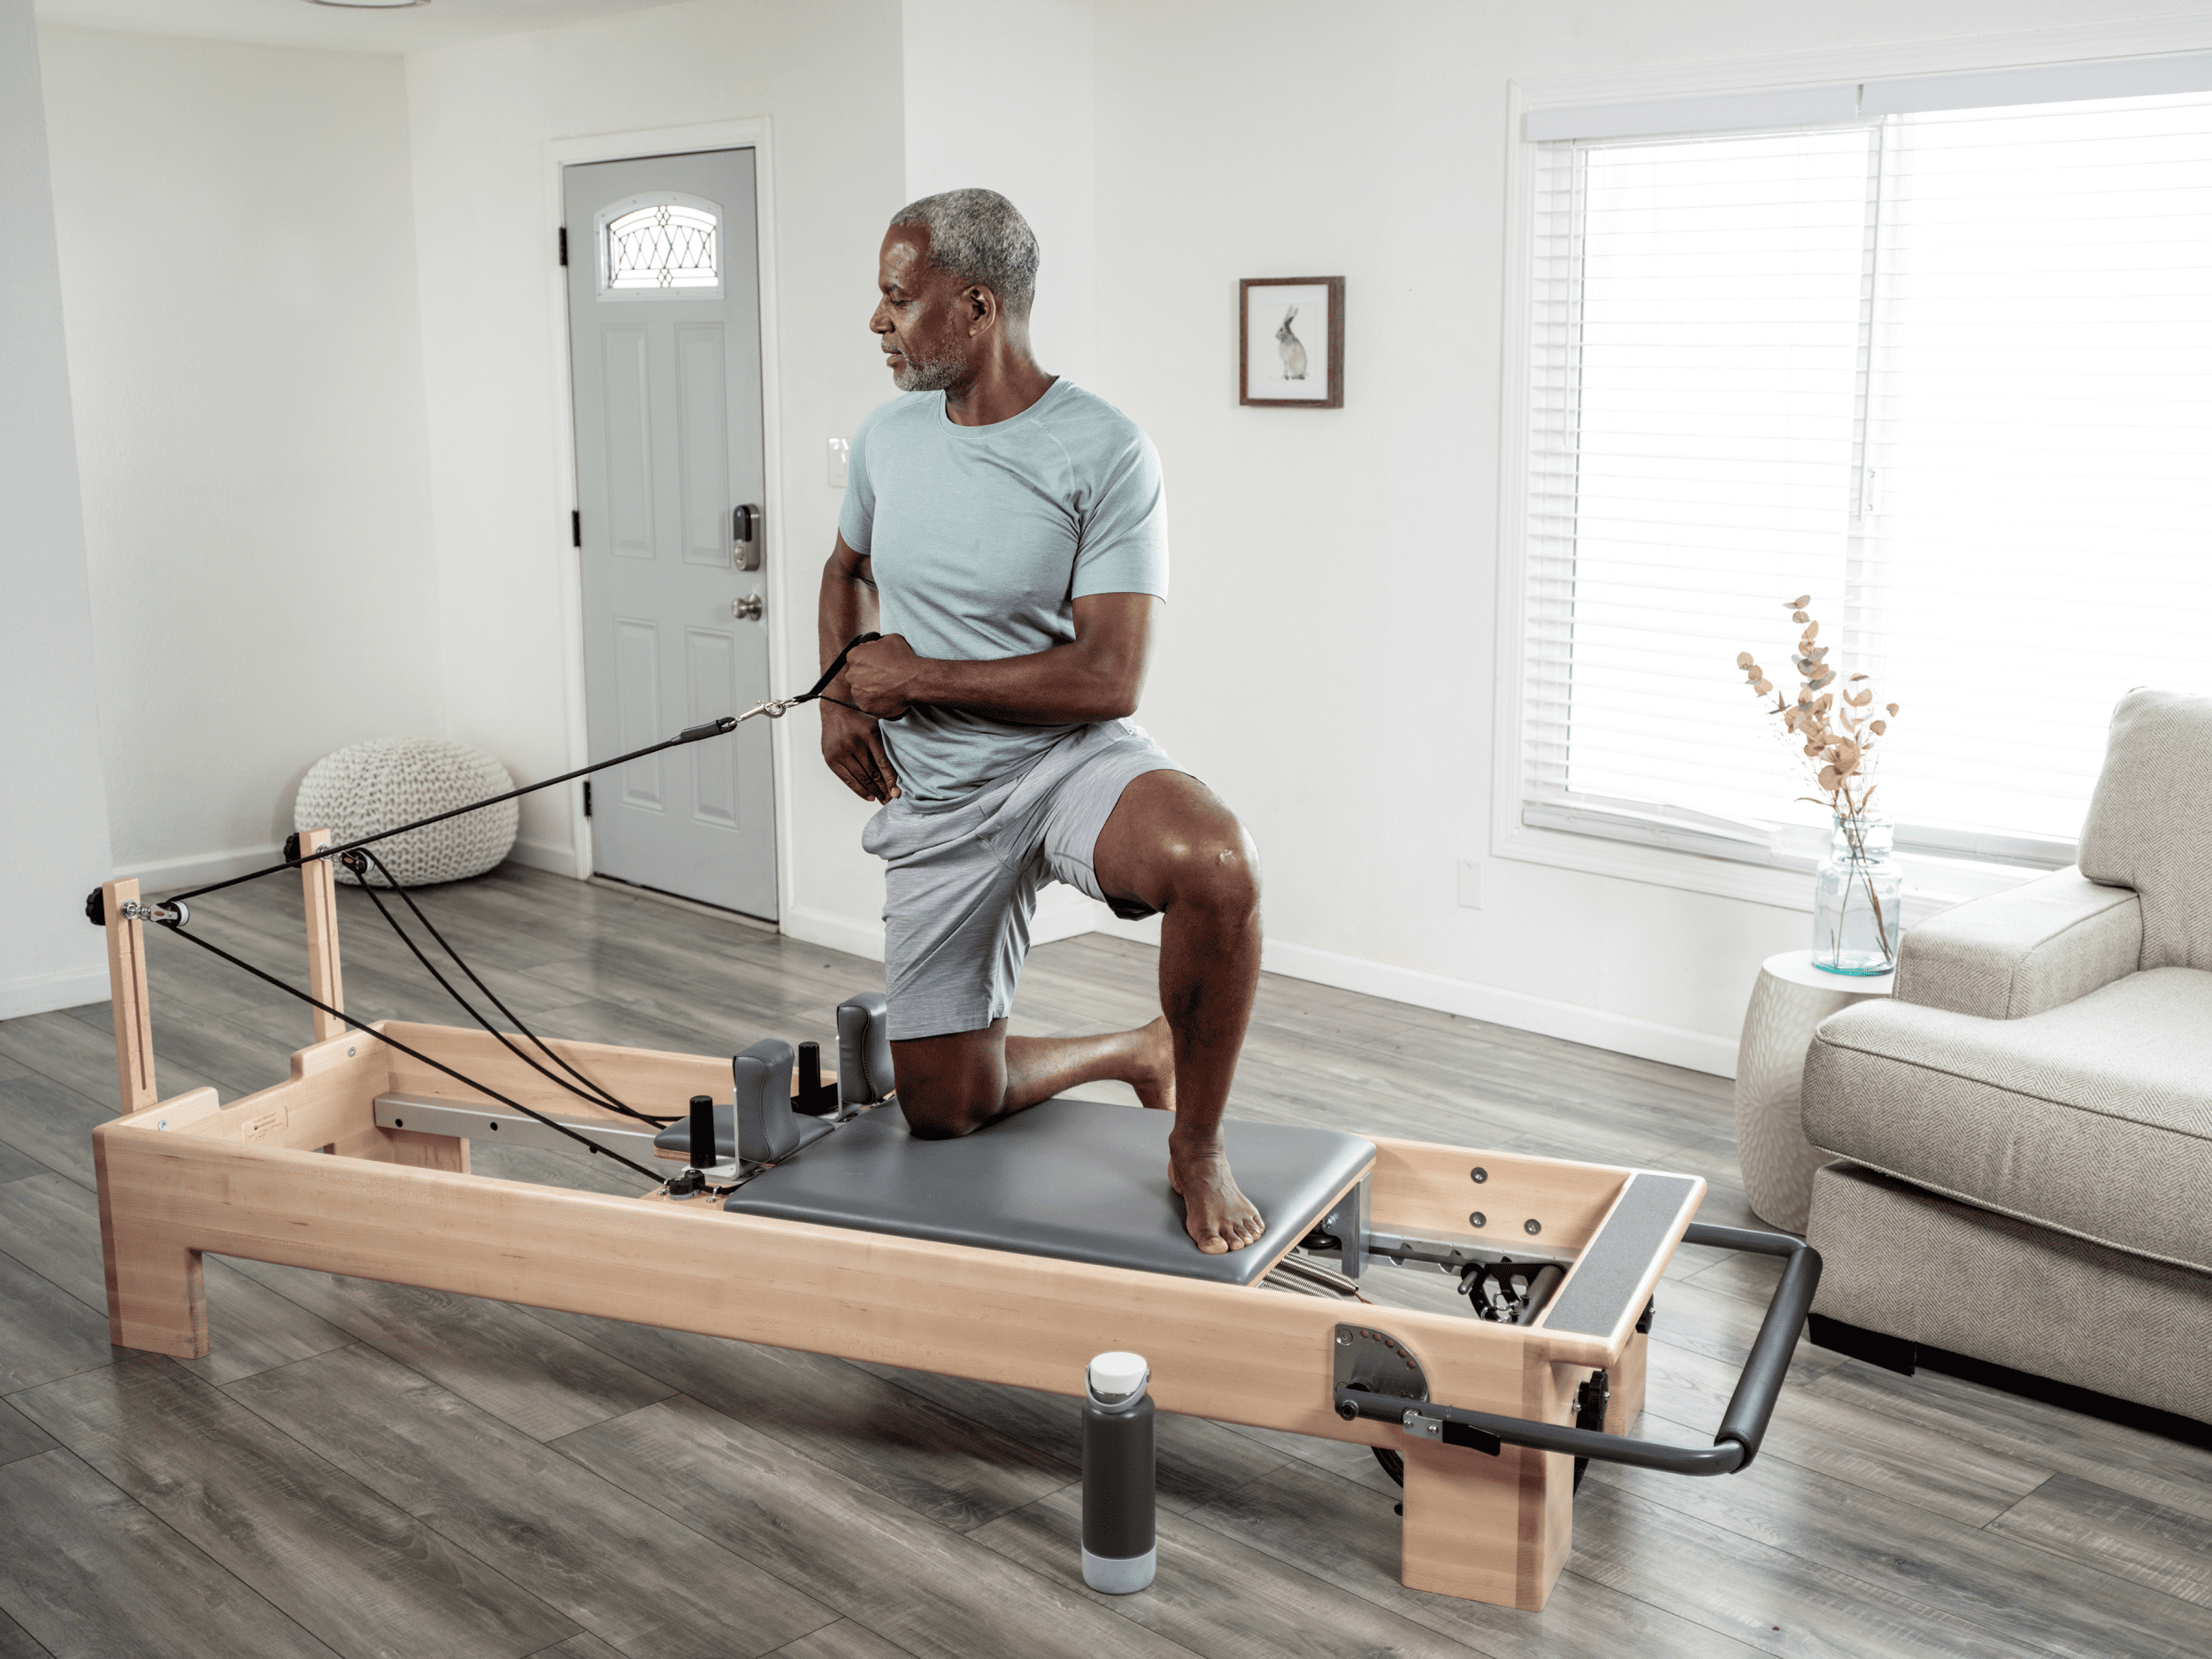 Man engaged in a Pilates exercise using a Studio Reformer with a XSR footbar with a Revo Springbar, emphasizing proper alignment and form.